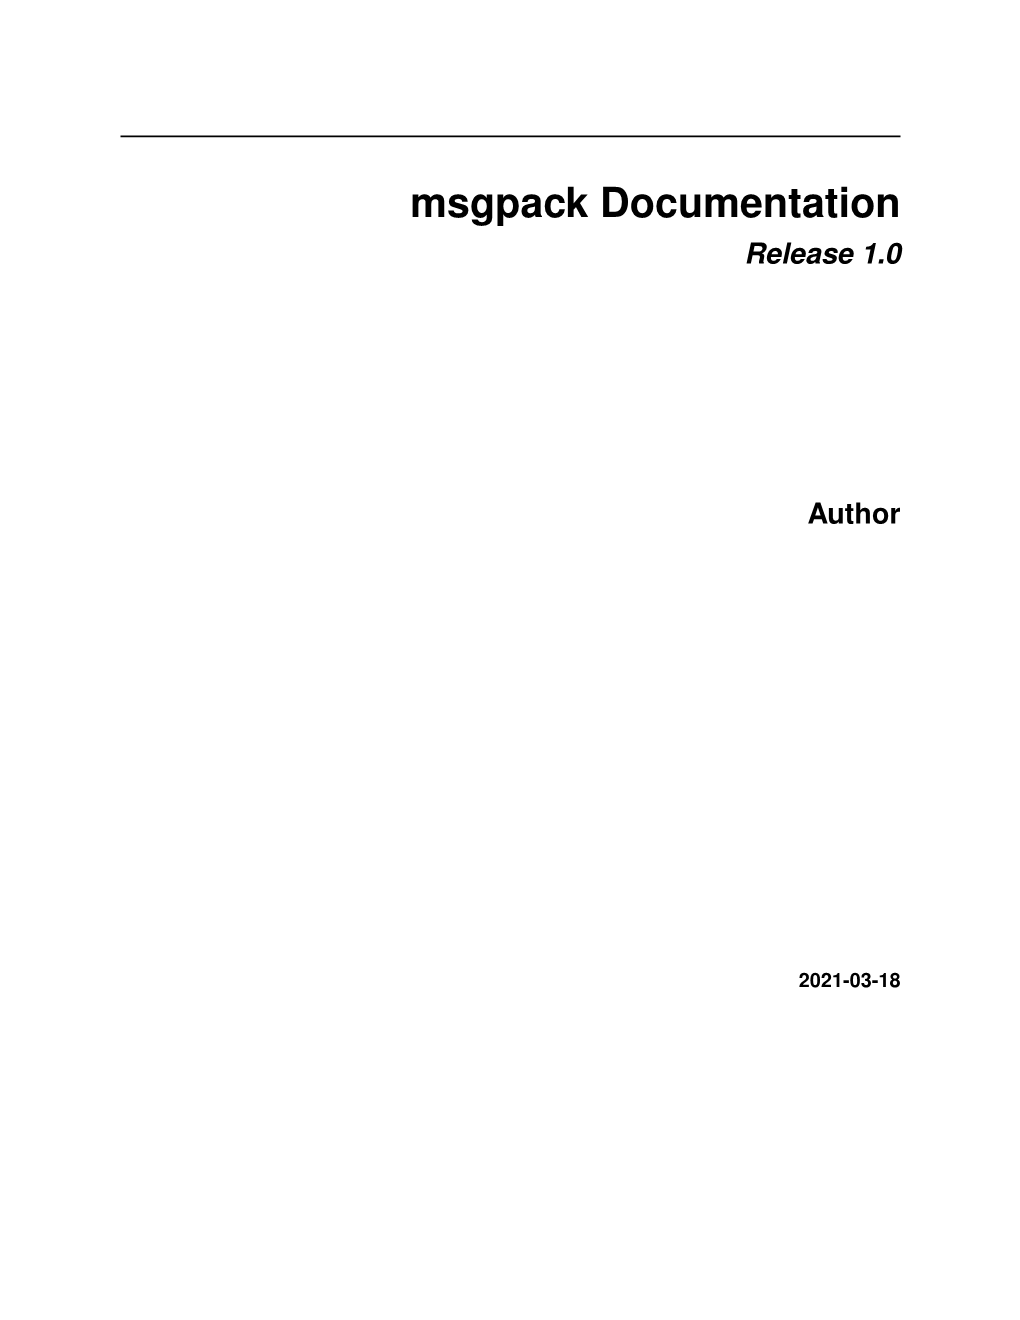 Msgpack Documentation Release 1.0